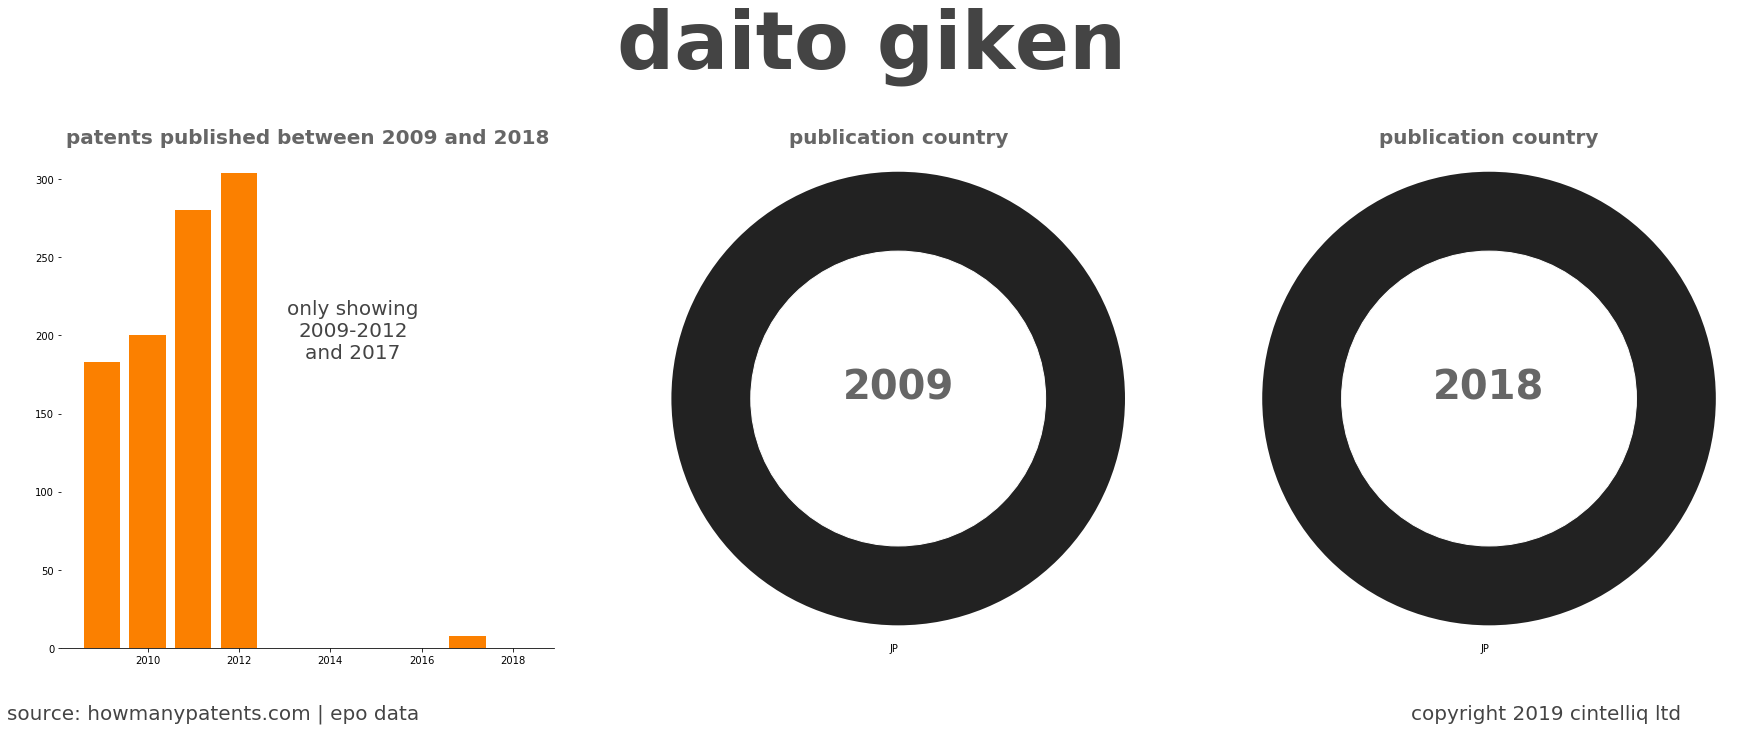 summary of patents for Daito Giken